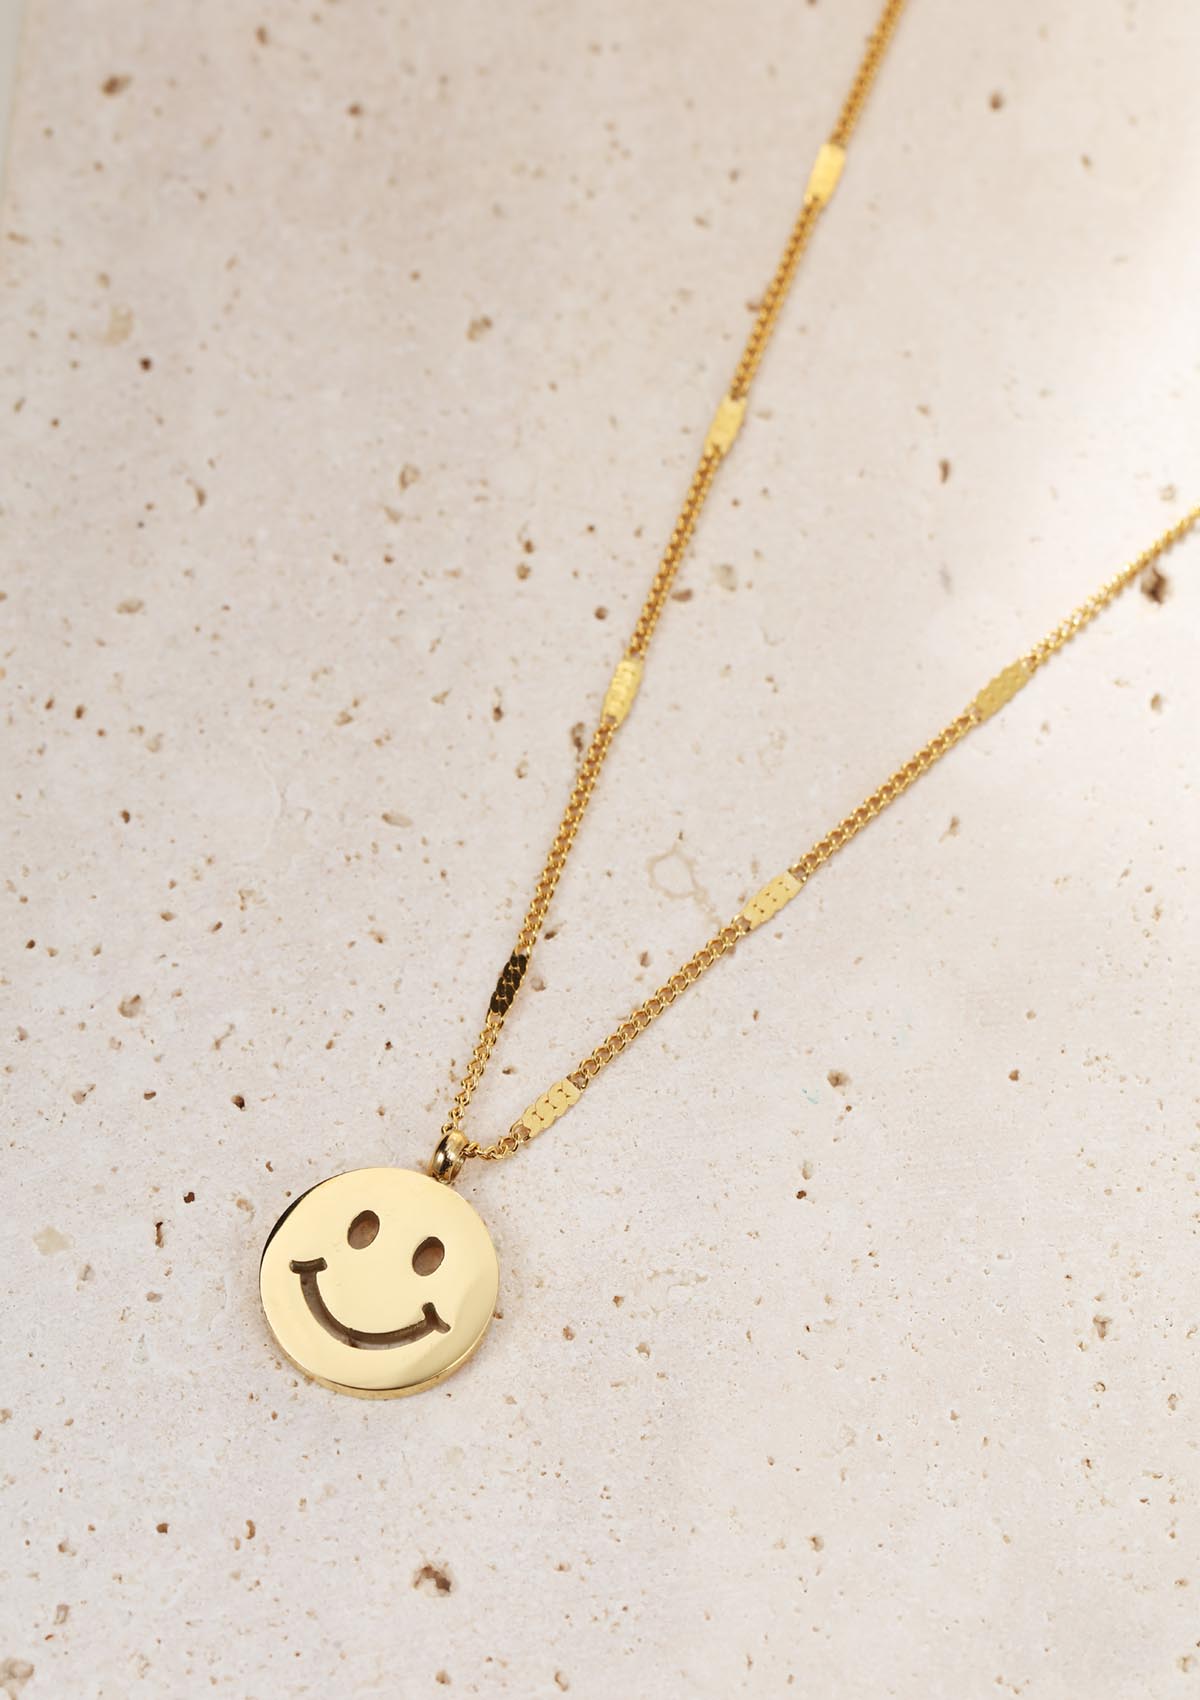 Kette Smiley Gesicht Anhänger Sterlingsilber in Gold – Hey Happiness